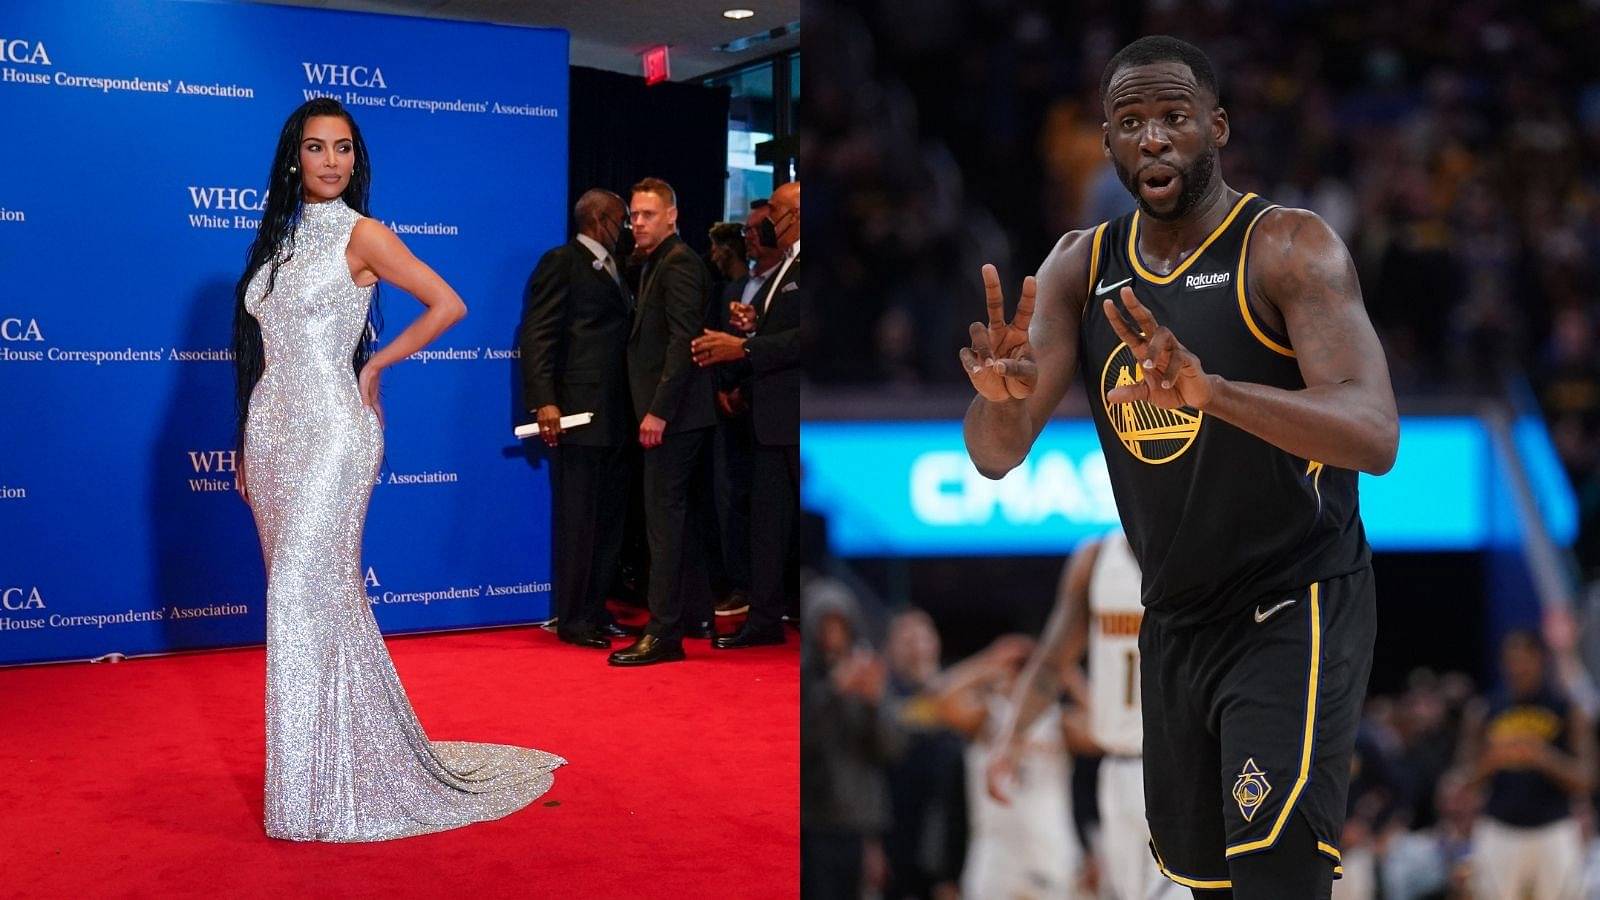 "They think they have the right to get mad at what diet Kim Kardashian follows?": Draymond Green teaches politically correct people a lesson on not harassing a celebrity for their personal choices